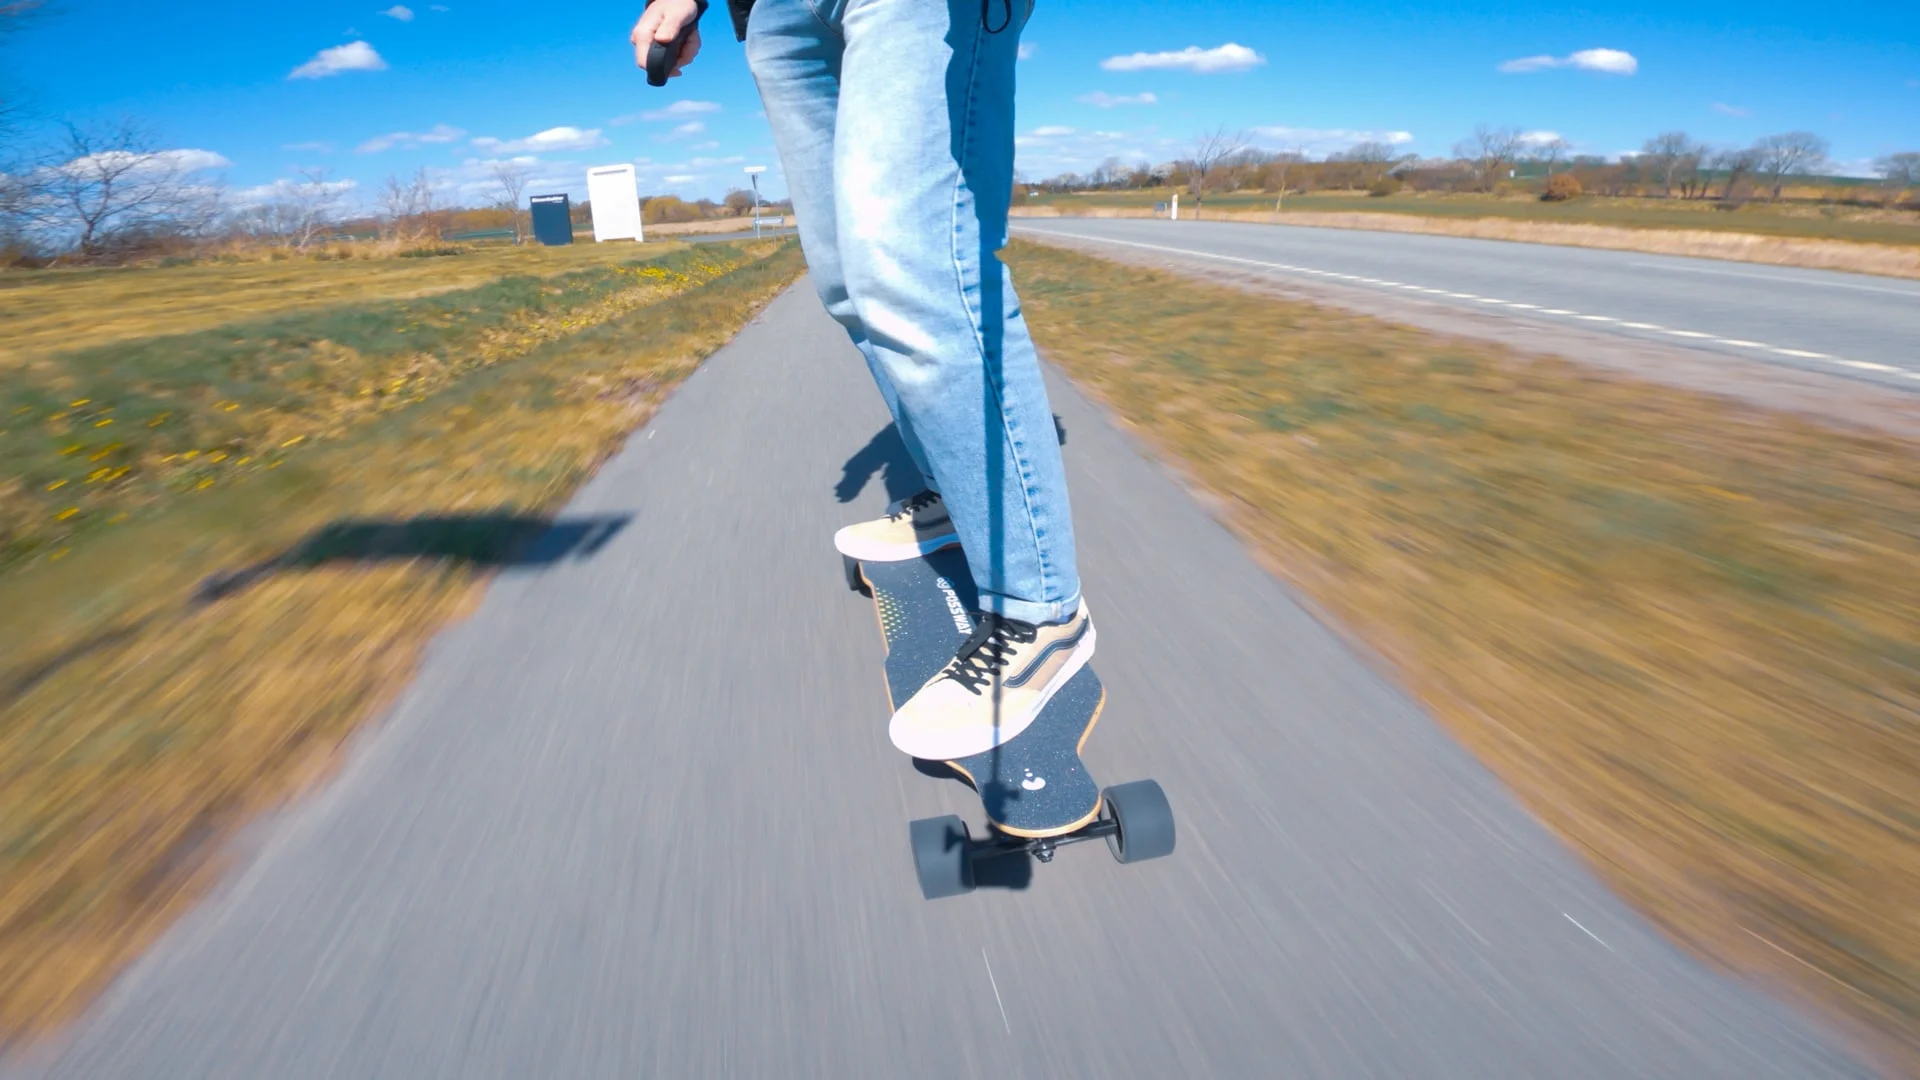 How To Use An Electric Skateboard